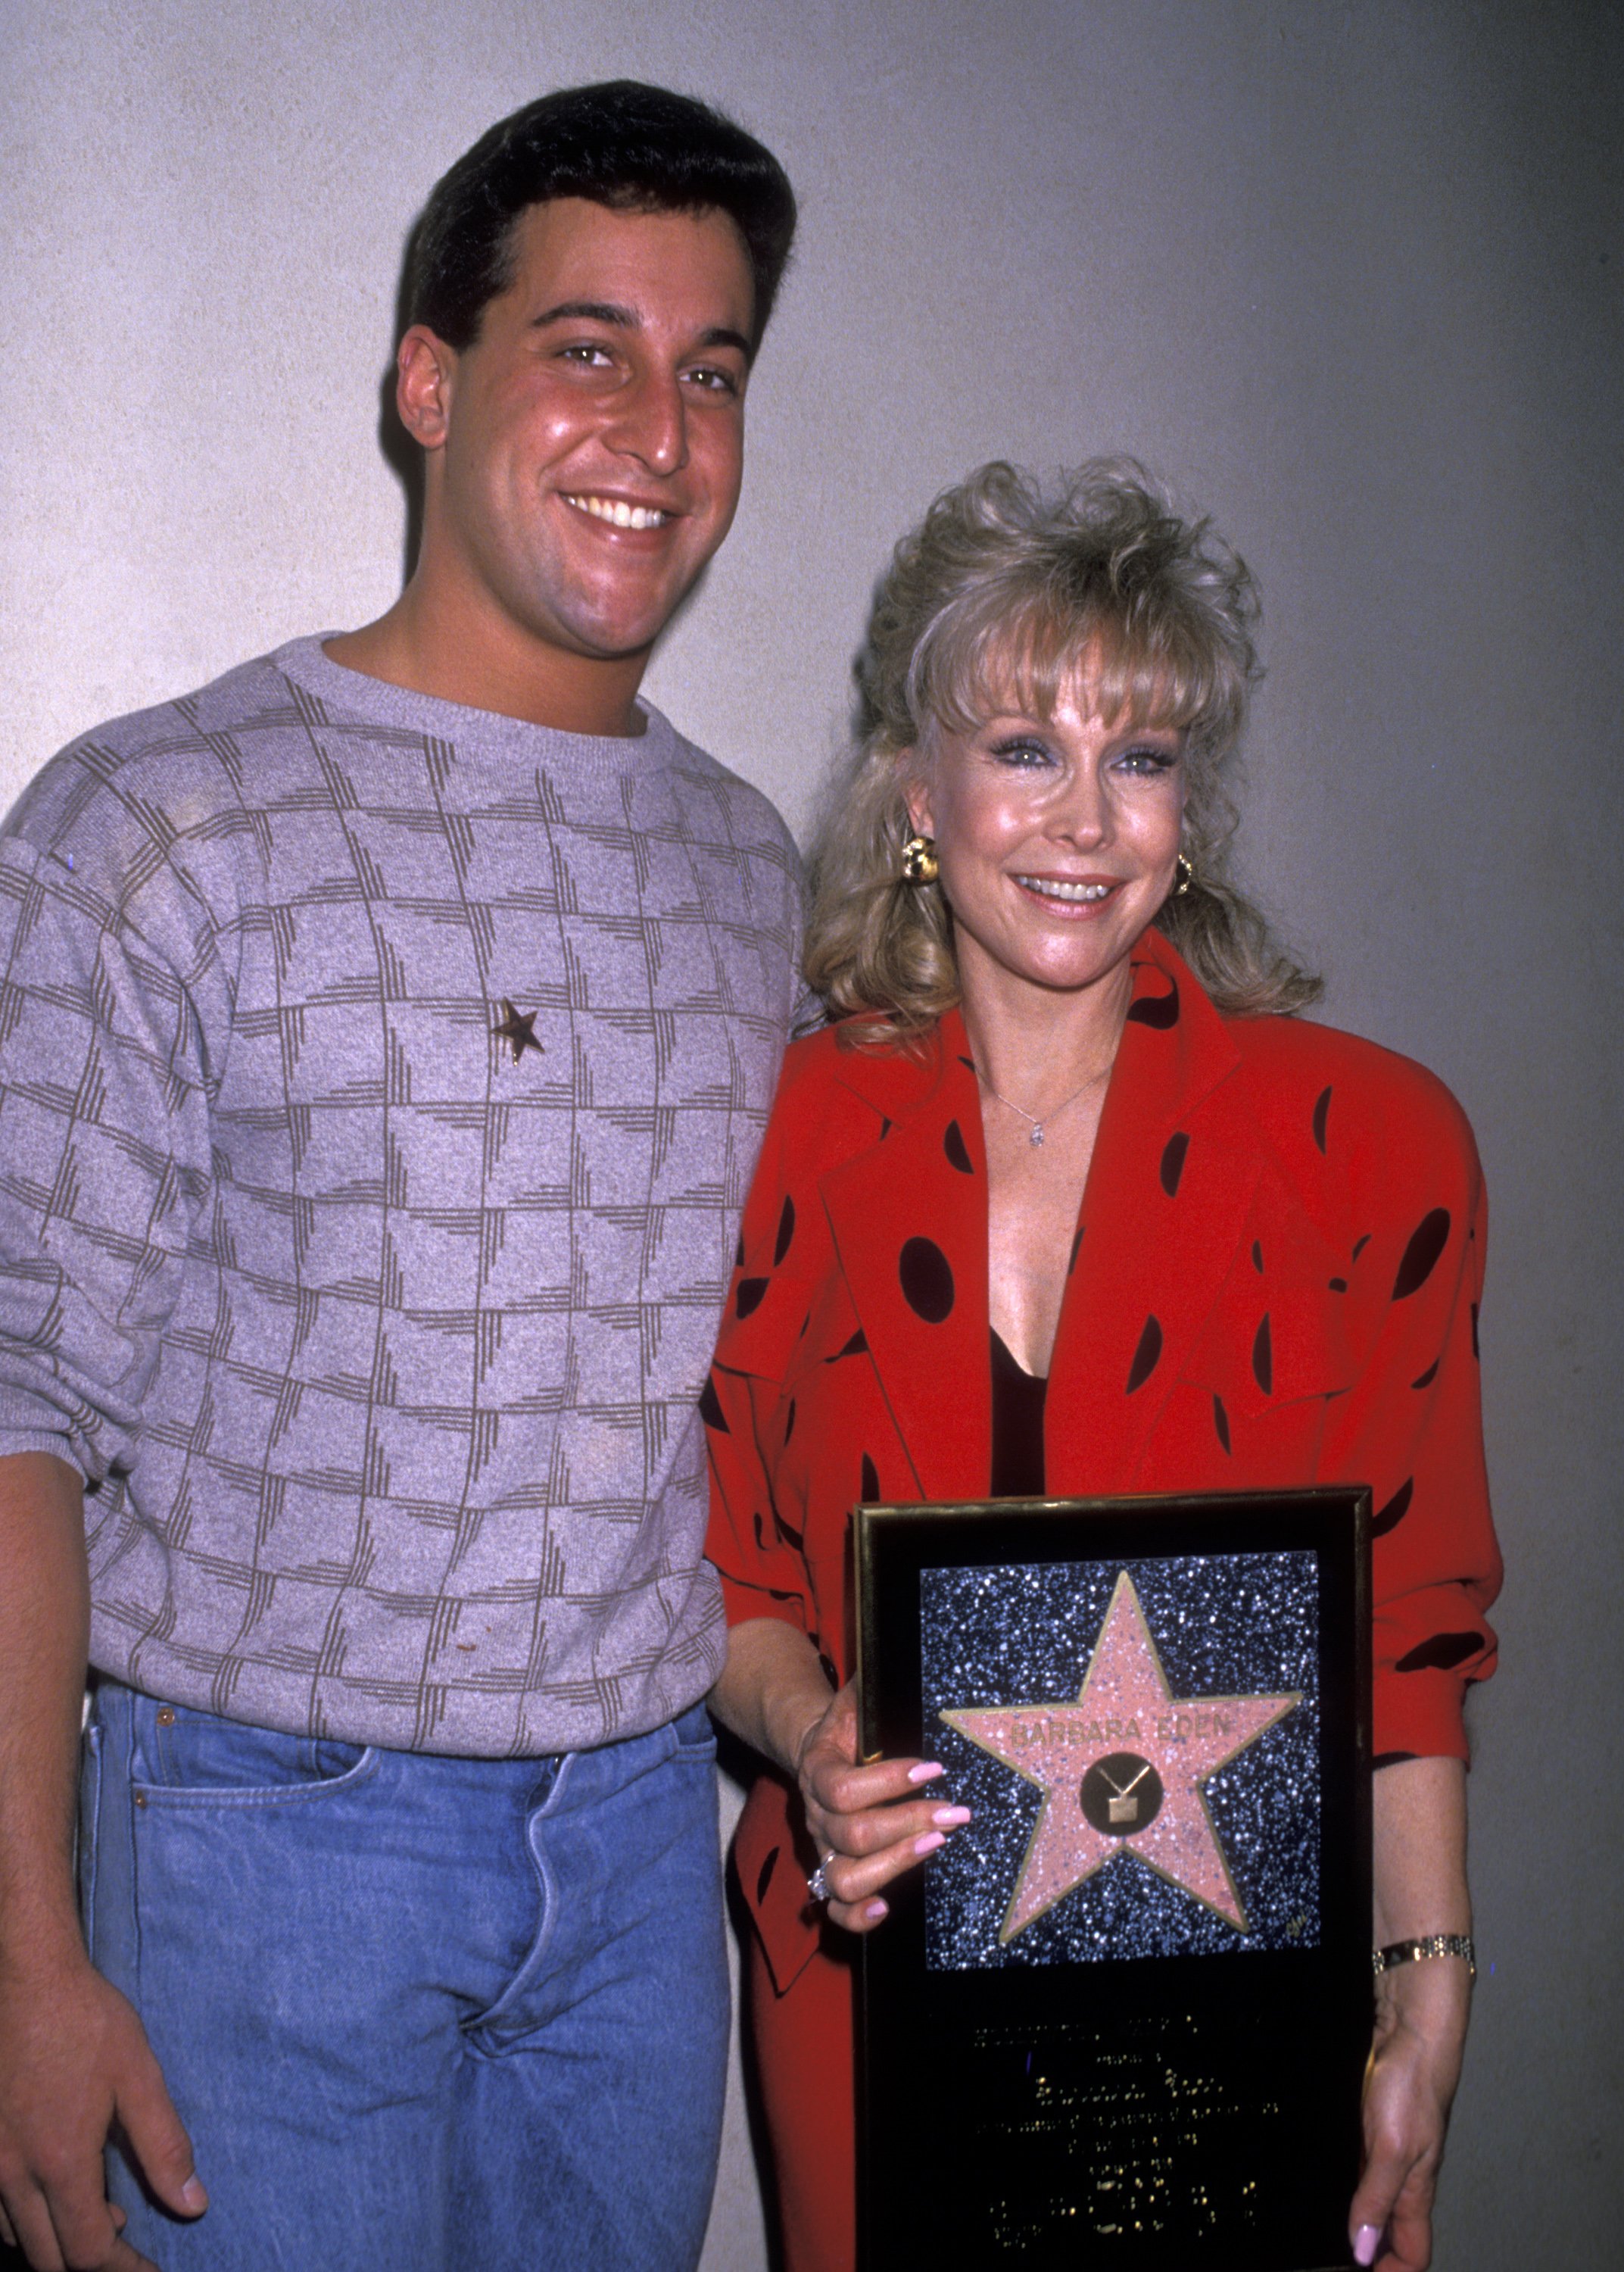 Actress Barbara Eden and son Matthew Ansara attend the "Hollywood Walk of Fame Ceremony Honoring Barbara Eden with a Star" on November 17, 1988 at 7003 Hollywood Boulevard in Hollywood, California.| Source: Getty Images